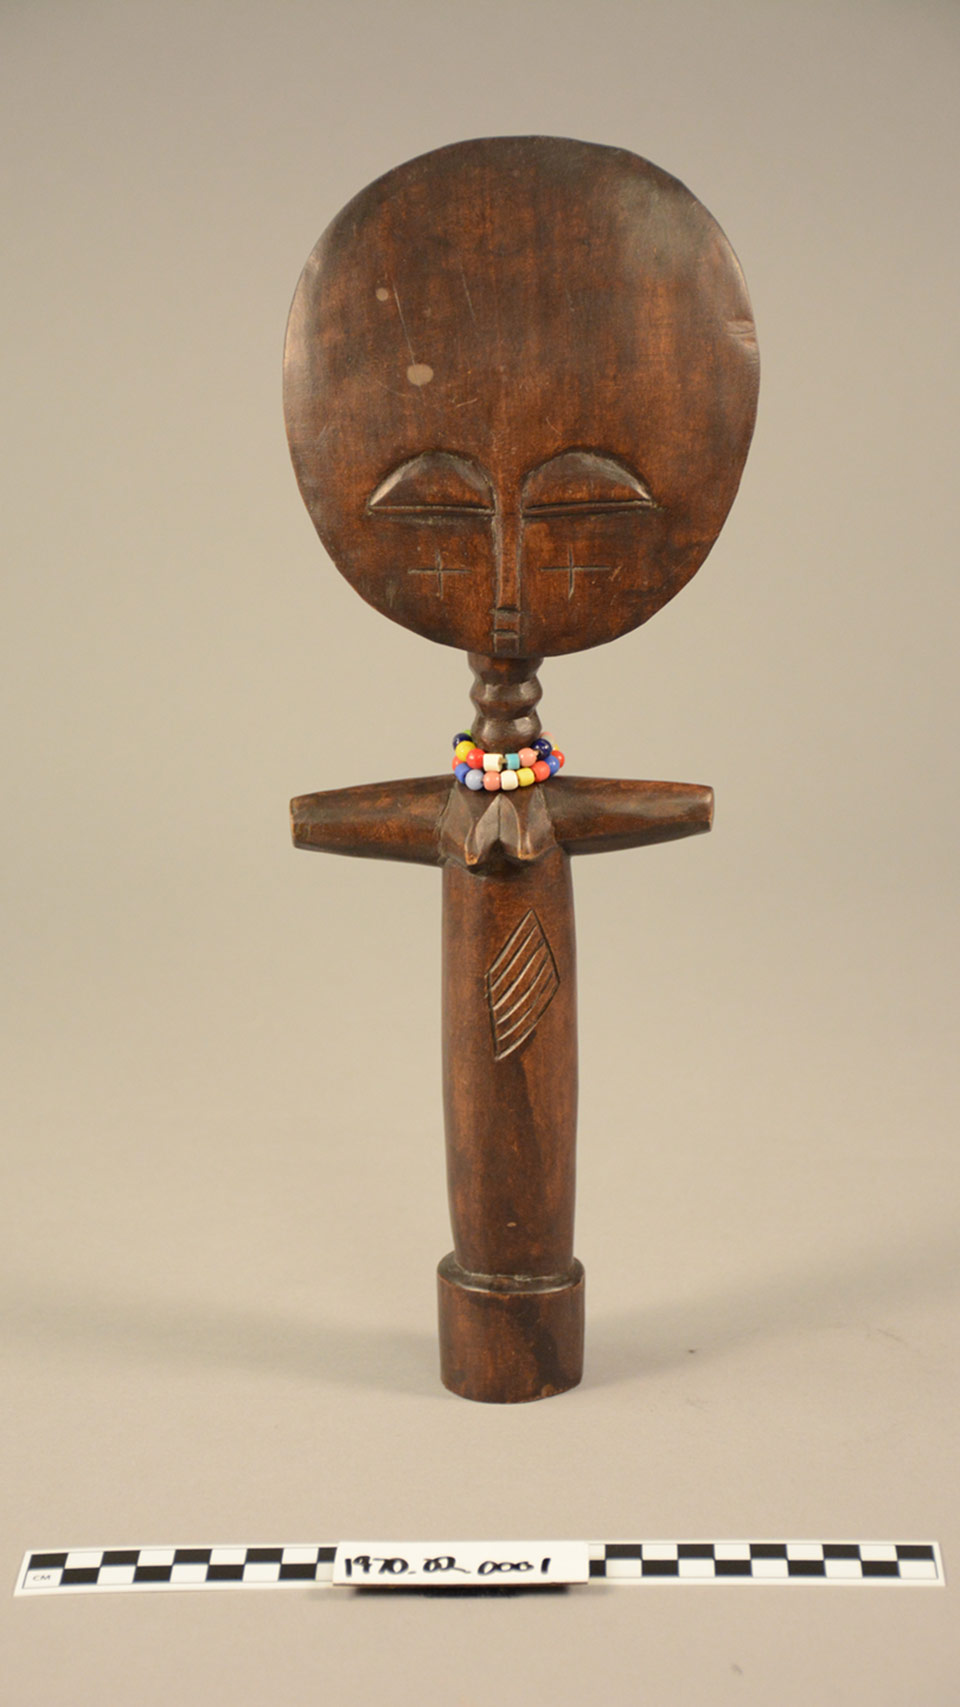 an old African doll made of wood photographed in paper background